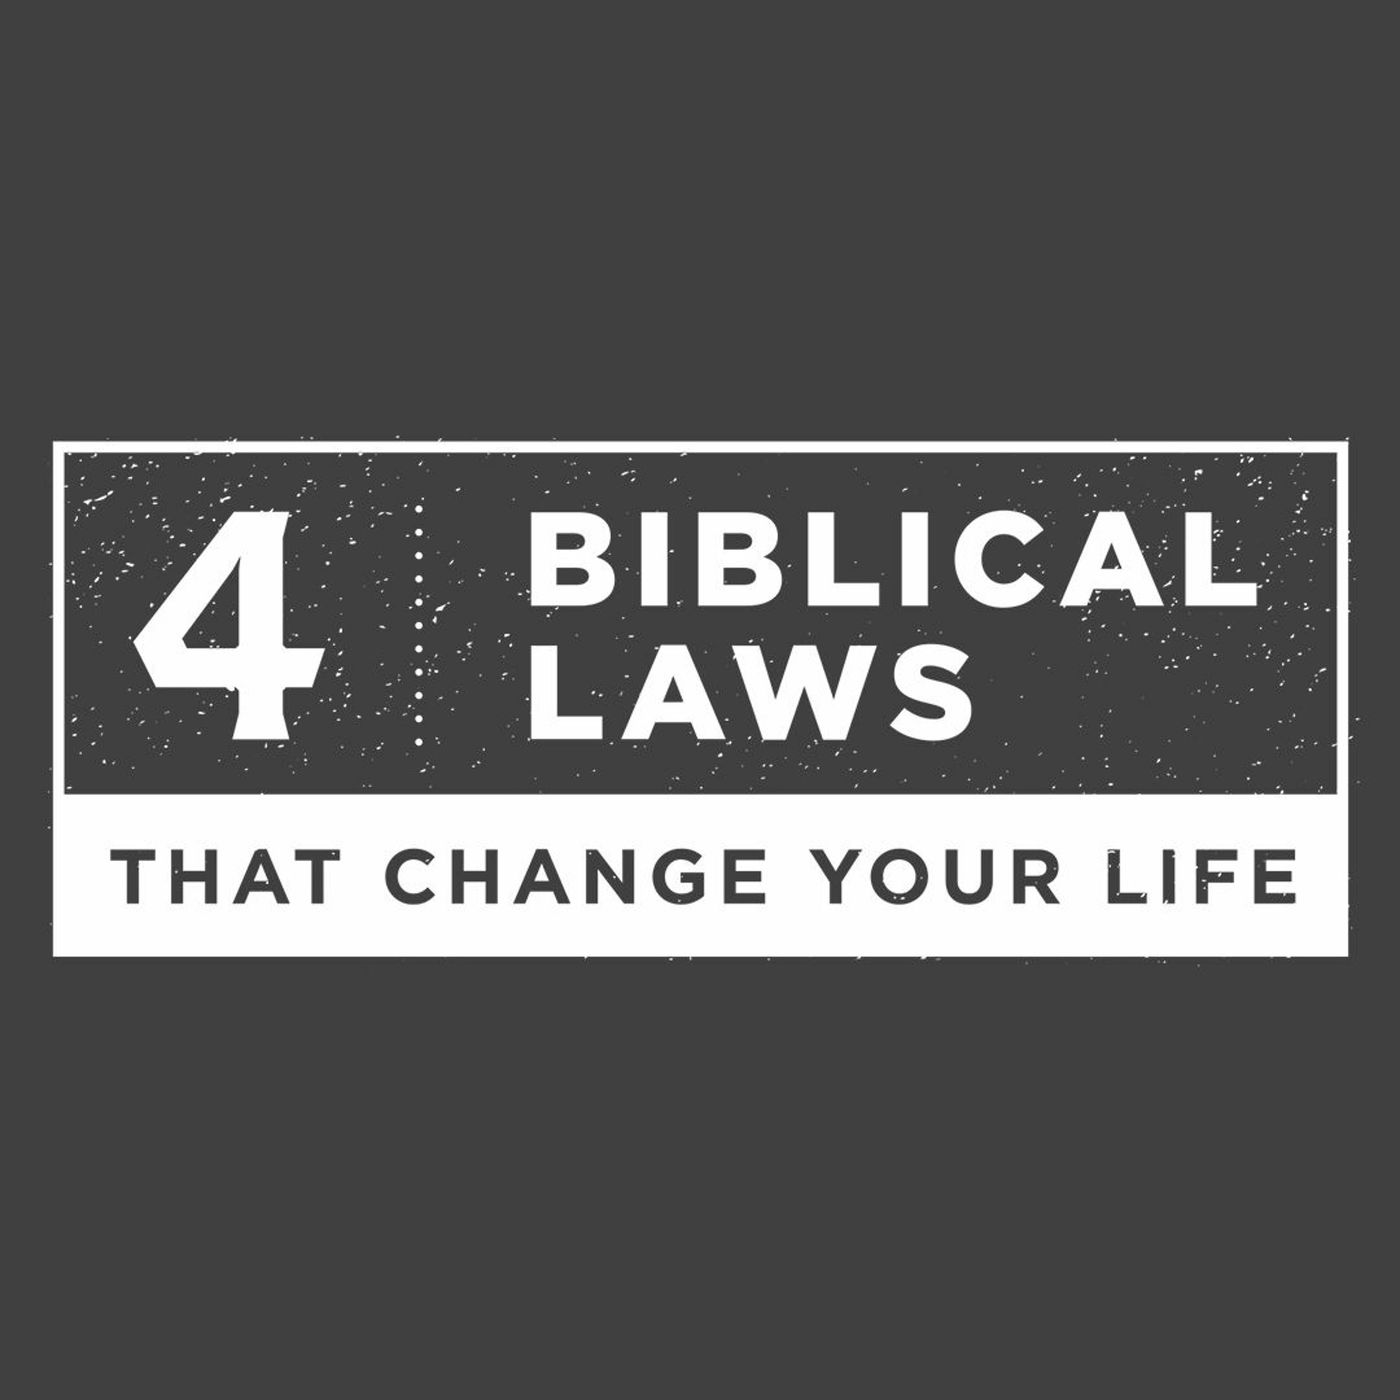 4 Biblical Laws #3 - The Law of Wise Counsel